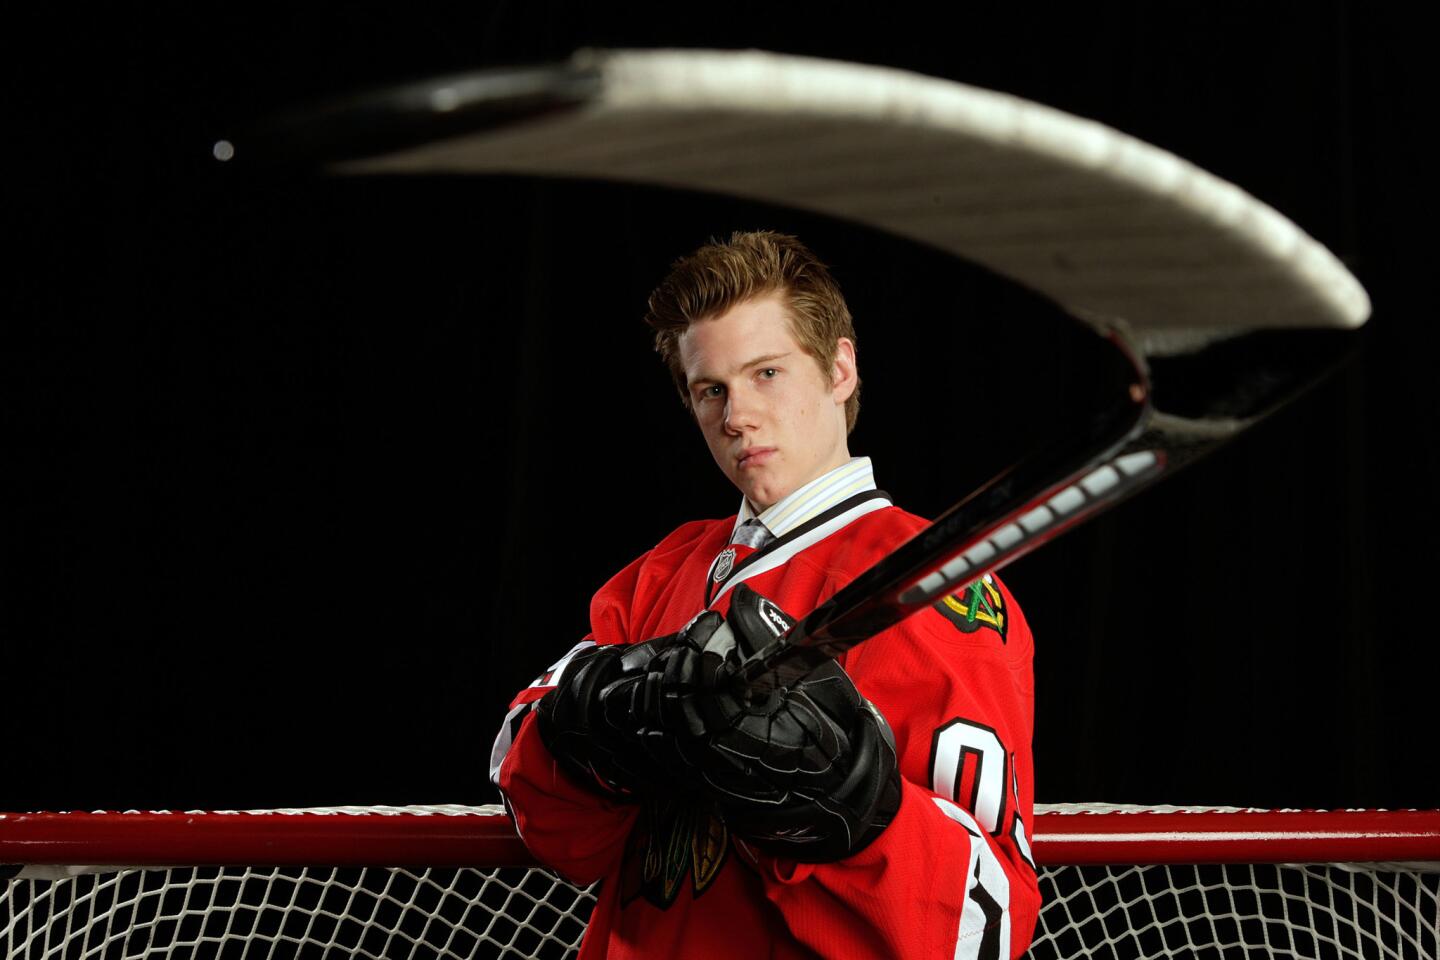 Played 28 games for the Hawks before they traded him to the Panthers in 2013 to bring back Kris Versteeg.